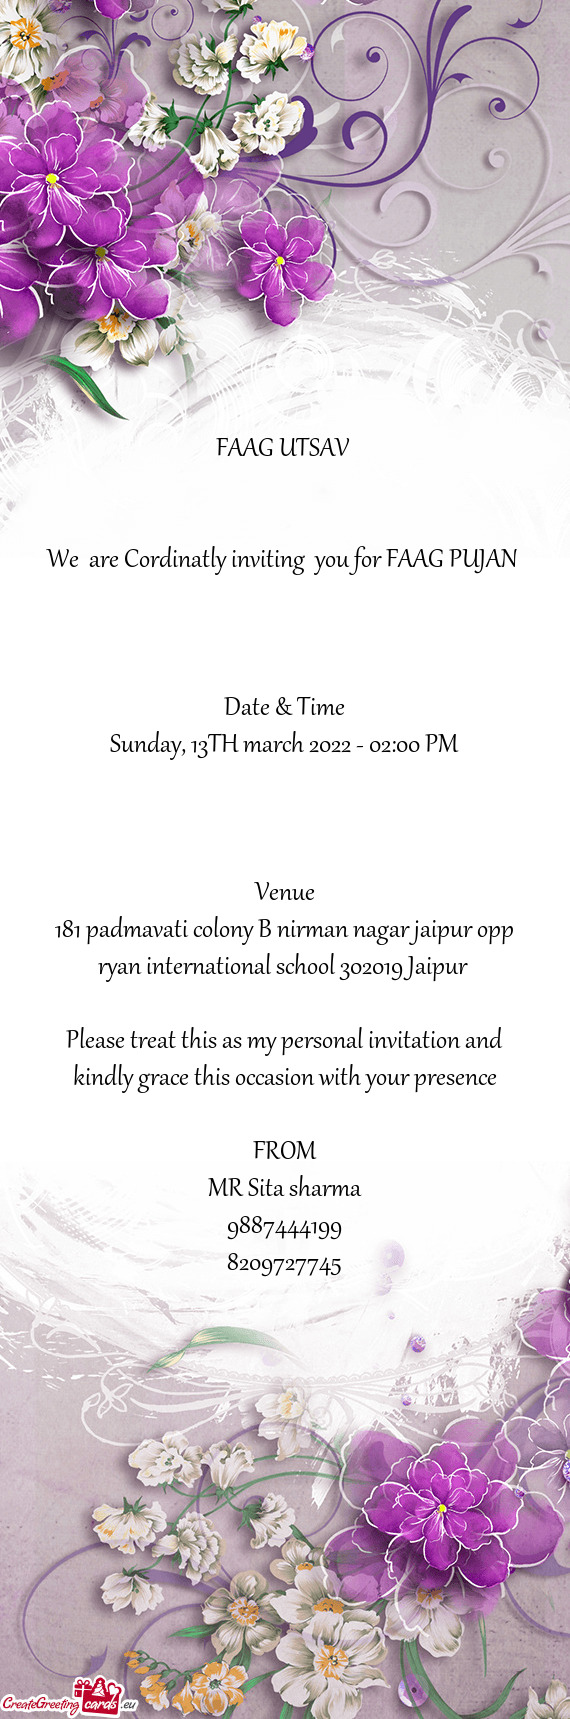 We are Cordinatly inviting you for FAAG PUJAN